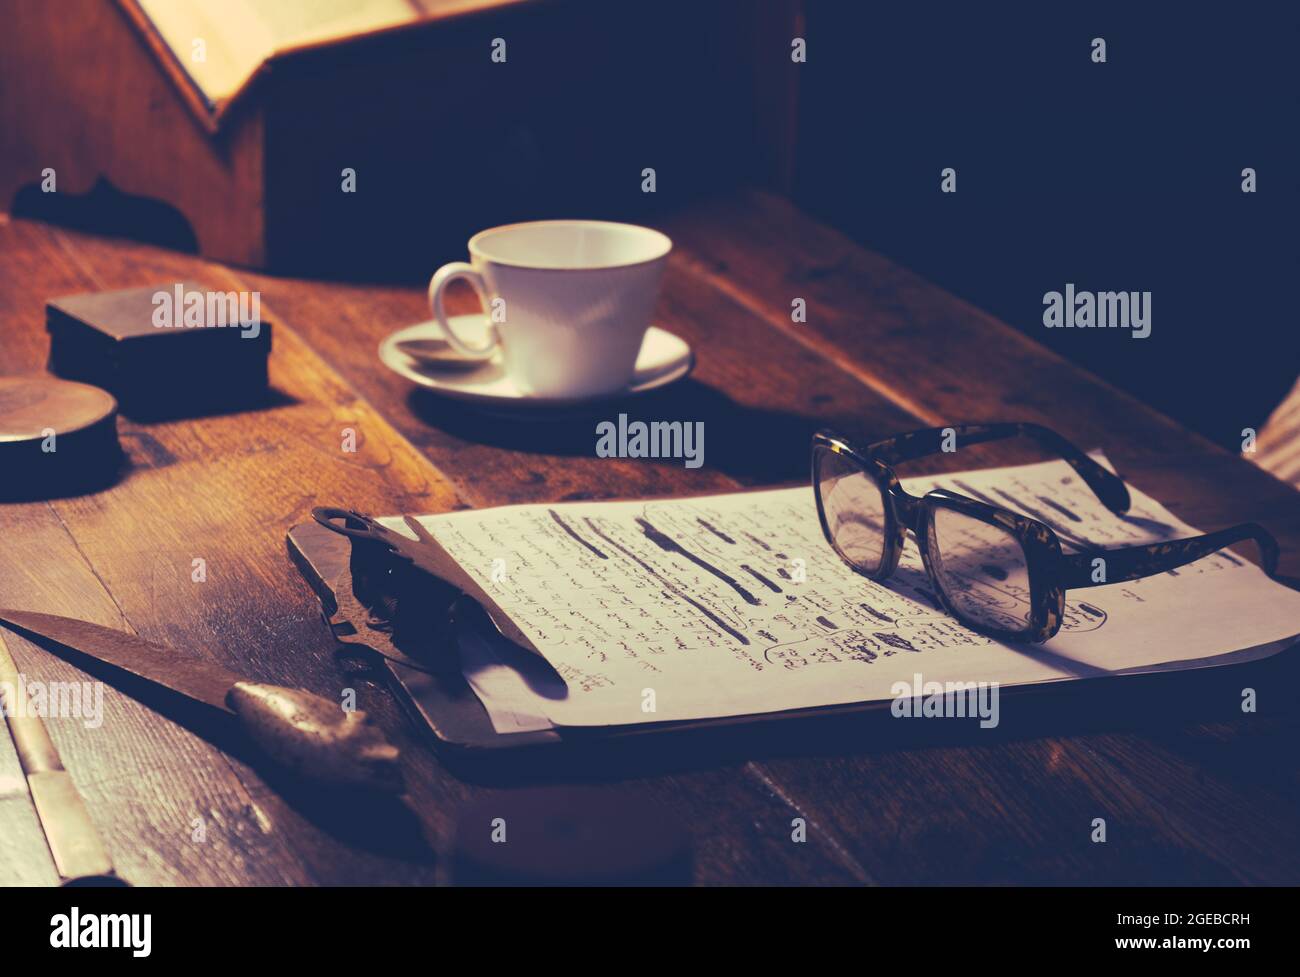 Detail Of A Writer Or Academic's Desk With Manuscript, Glasses And A Cup Of Tea Stock Photo